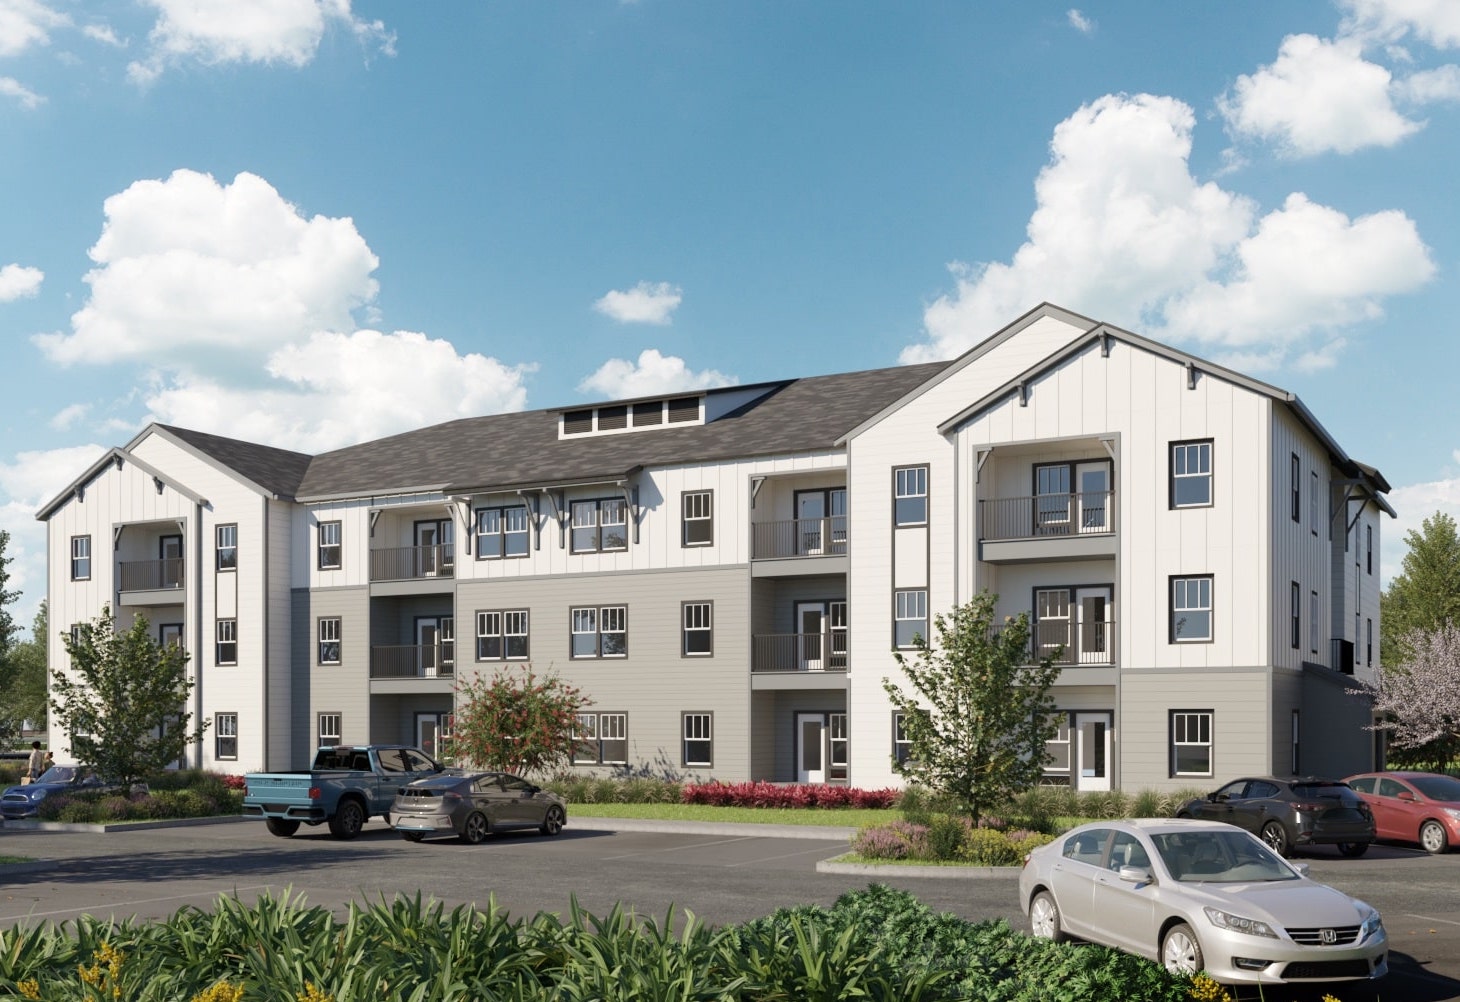 FCP and Crosland Southeast Break Ground on The Exchange at Indian Land Mixed-Use Multifamily Community in Charlotte Submarket